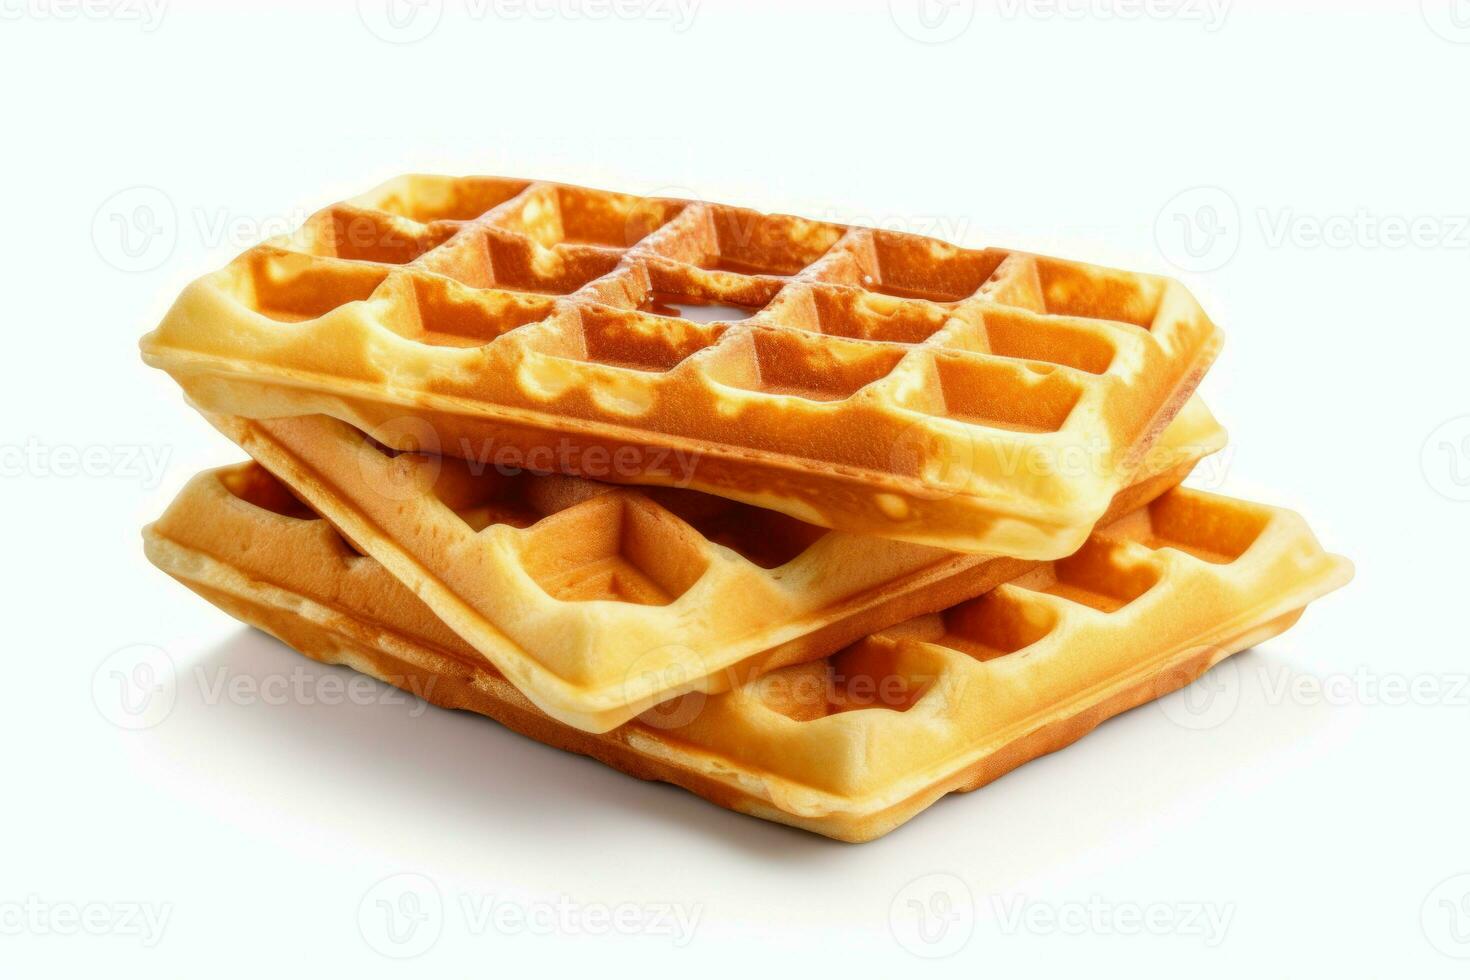 Delicious waffles from Belgium have been heat treated with sweetness. Generate Ai photo